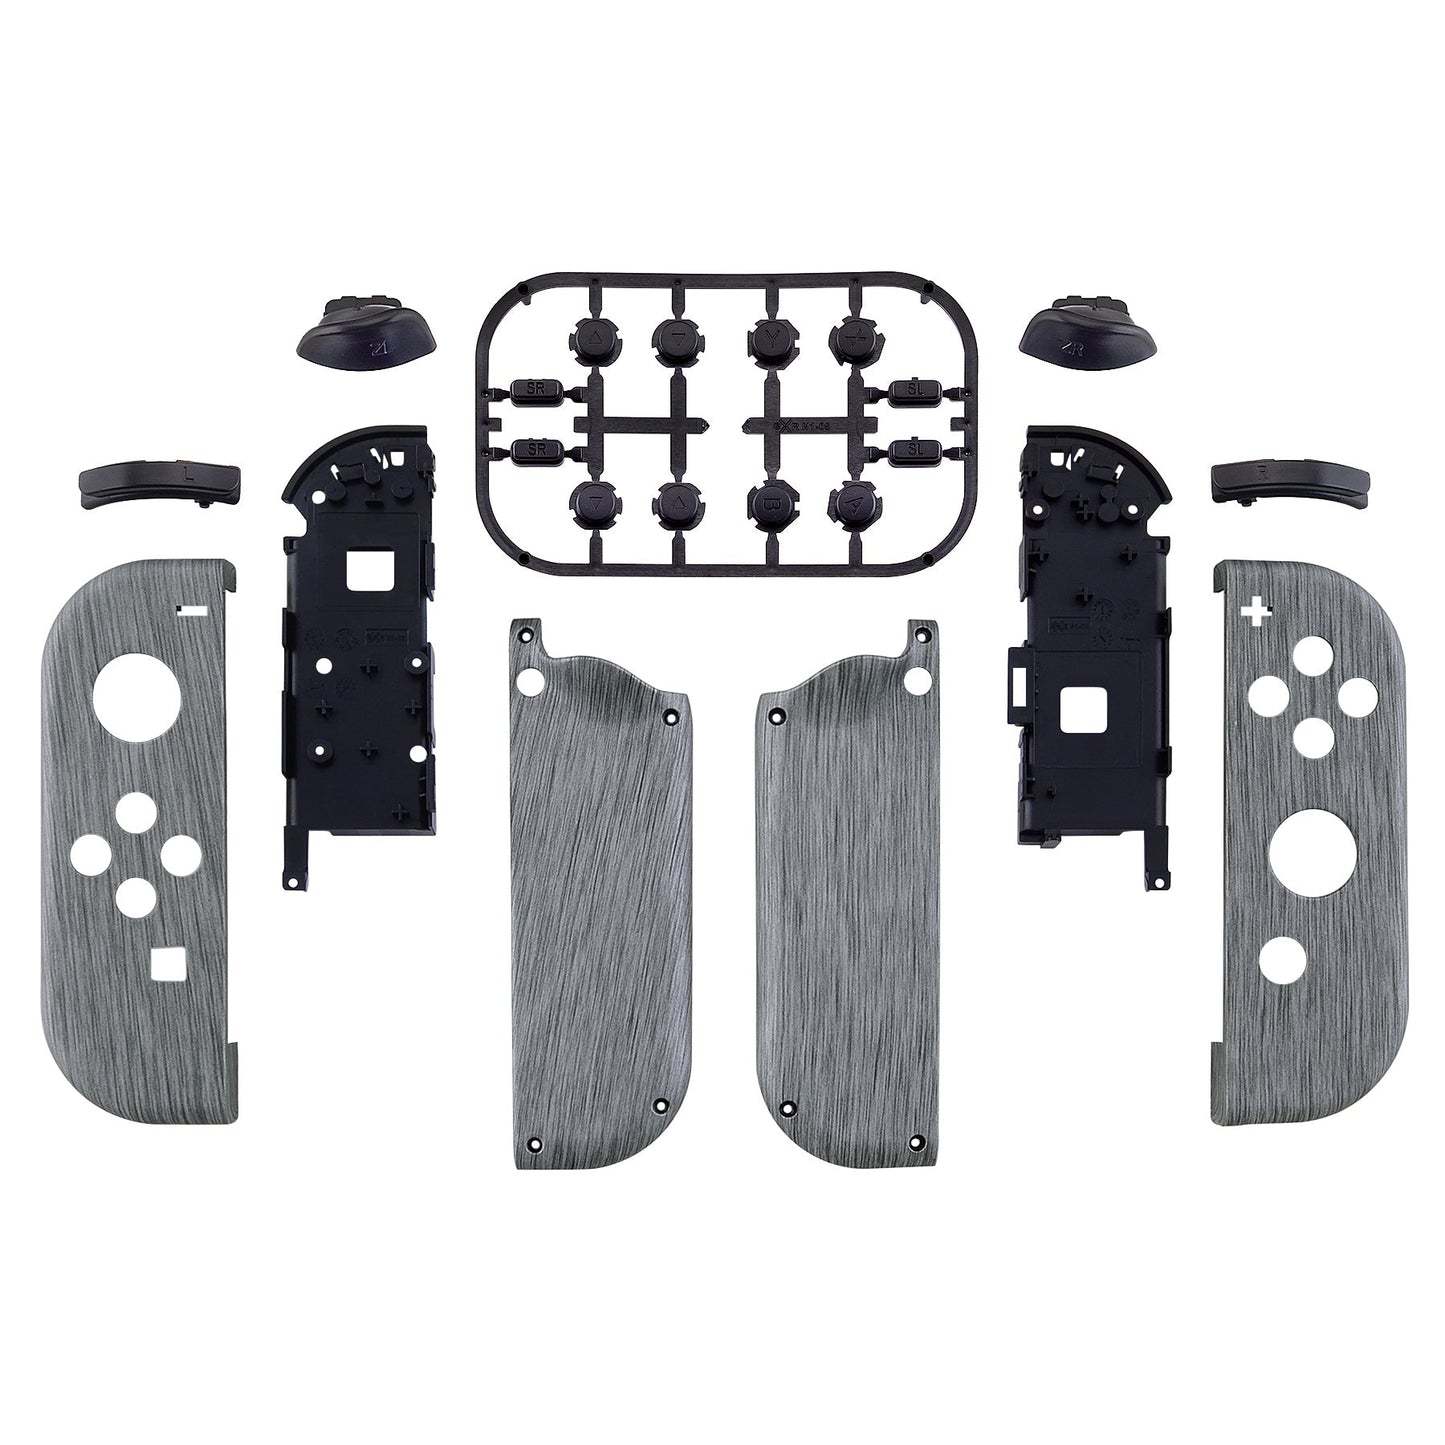 eXtremeRate Retail Soft Touch Grip Brushed Silver Patterned Joycon Handheld Controller Housing with Full Set Buttons, DIY Replacement Shell Case for NS Switch JoyCon & OLED JoyCon - Console Shell NOT Included -CS206